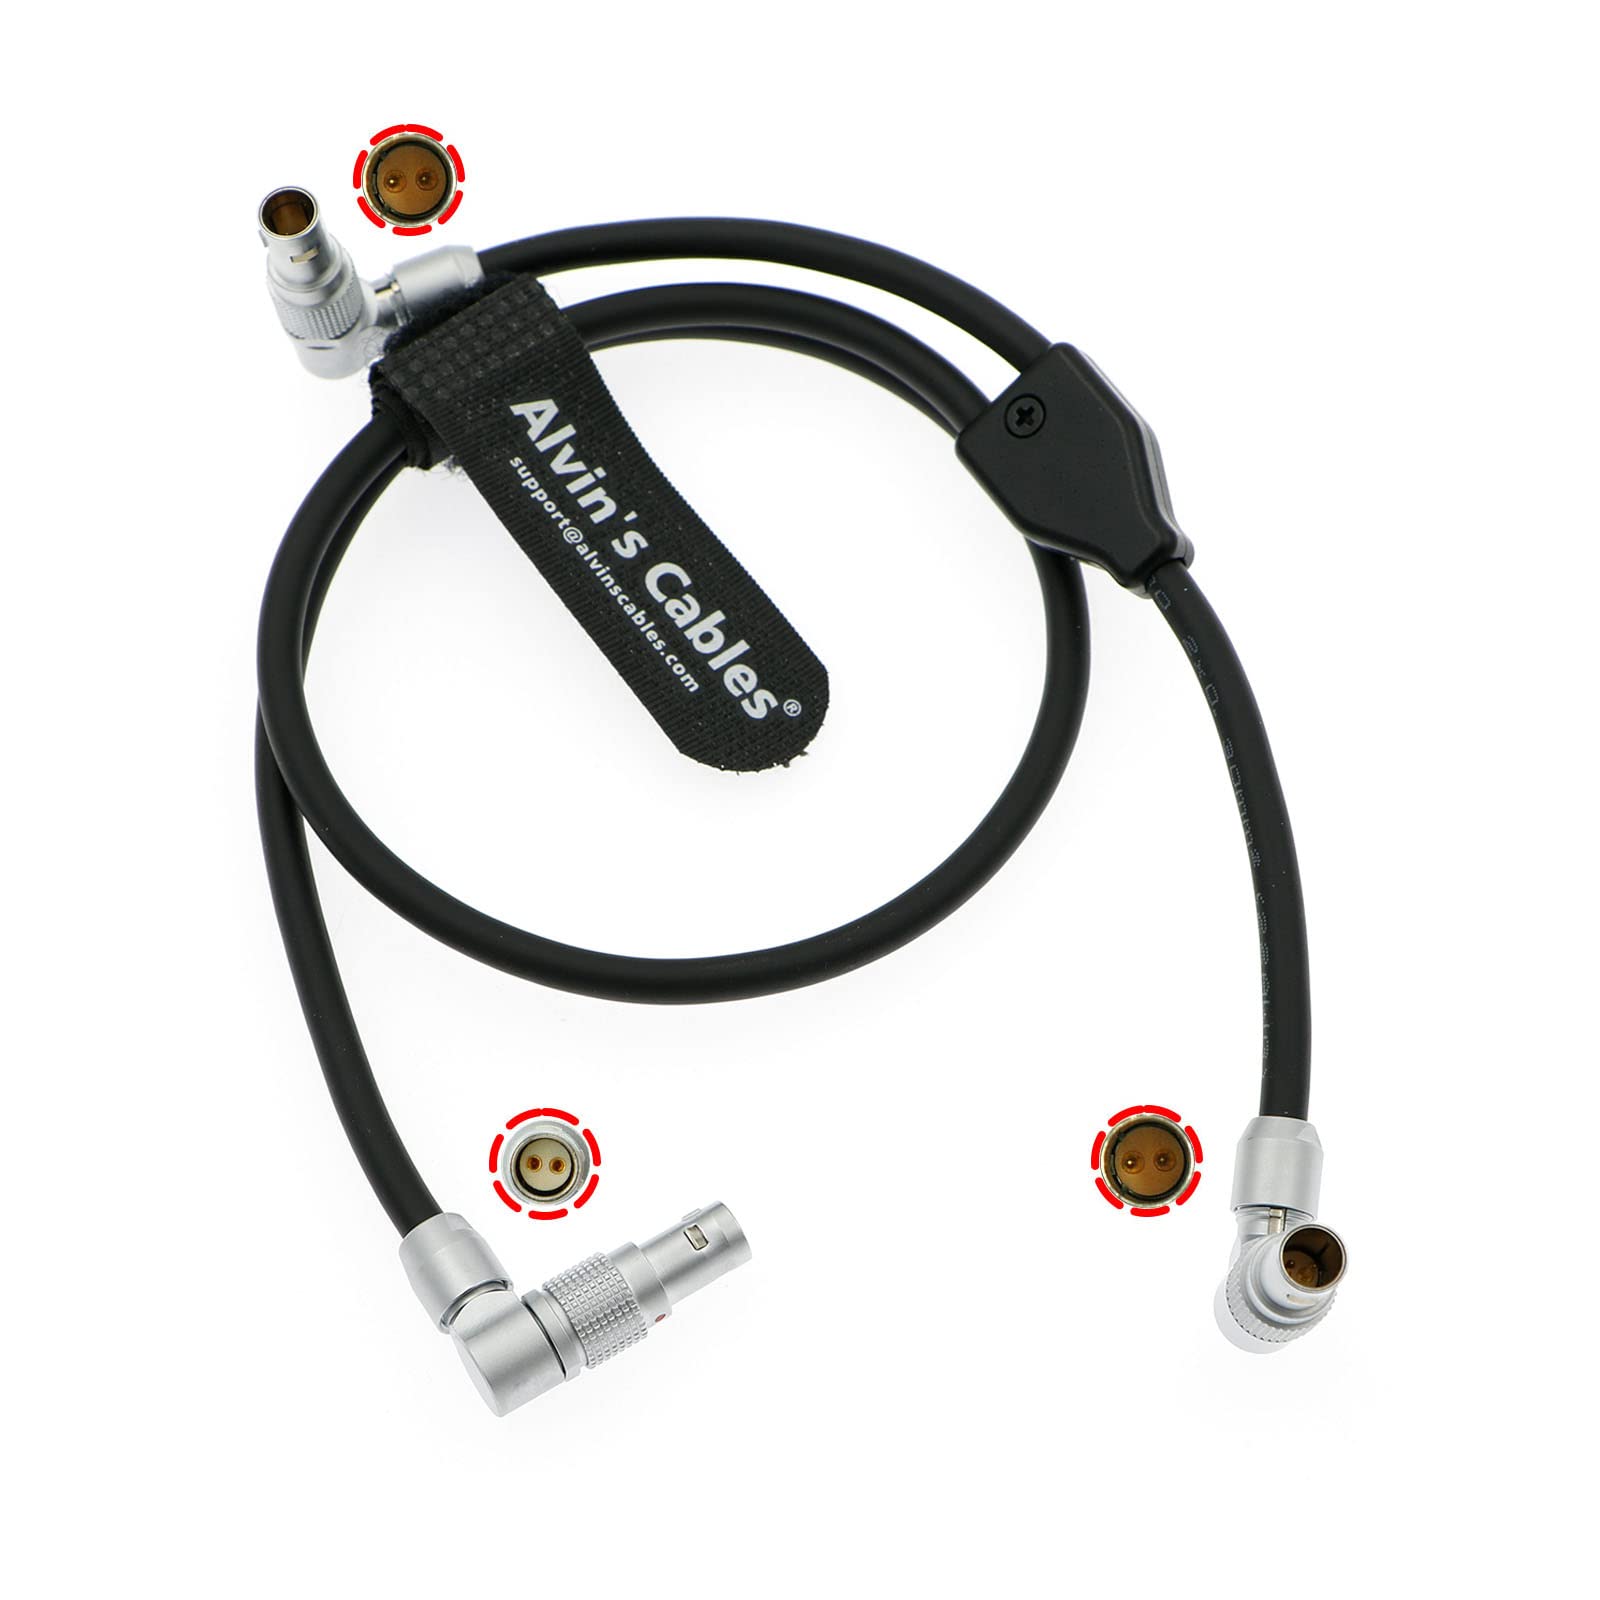 Alvin's Cables Power Cable for DJI RS2 RSC RS3 Pro| RED-Komodo Rotatable 2 Pin Male to Adjustable 2 Pin Male & 2 Pin Female Y Cable for Tilta Float Gimbal Support System